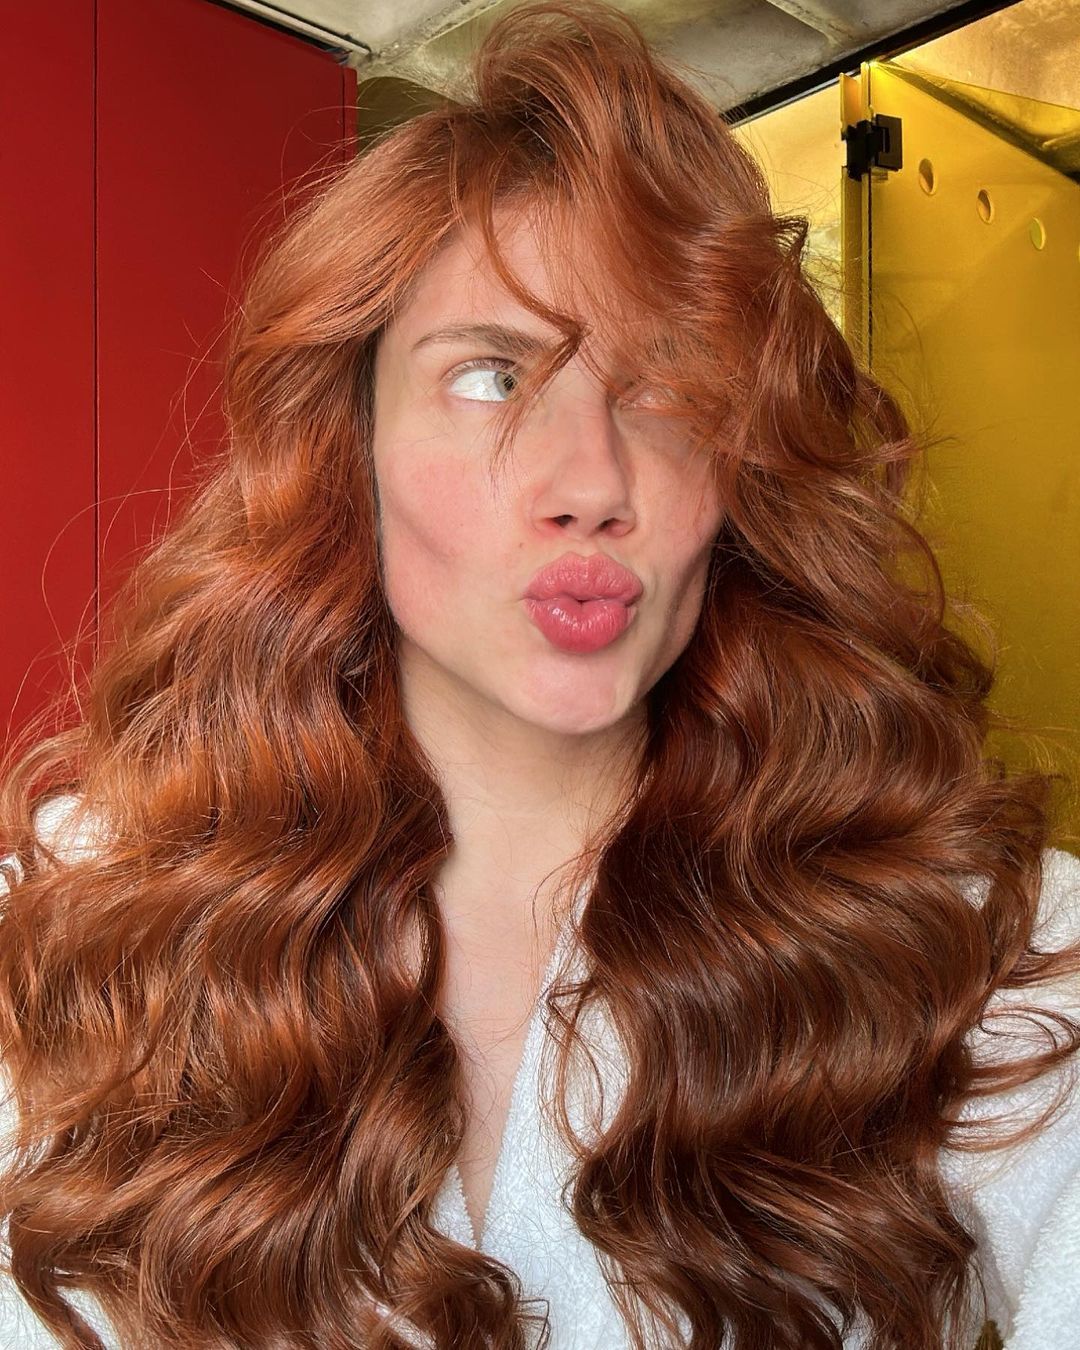 A woman with luscious red hair puckering for a playful selfie